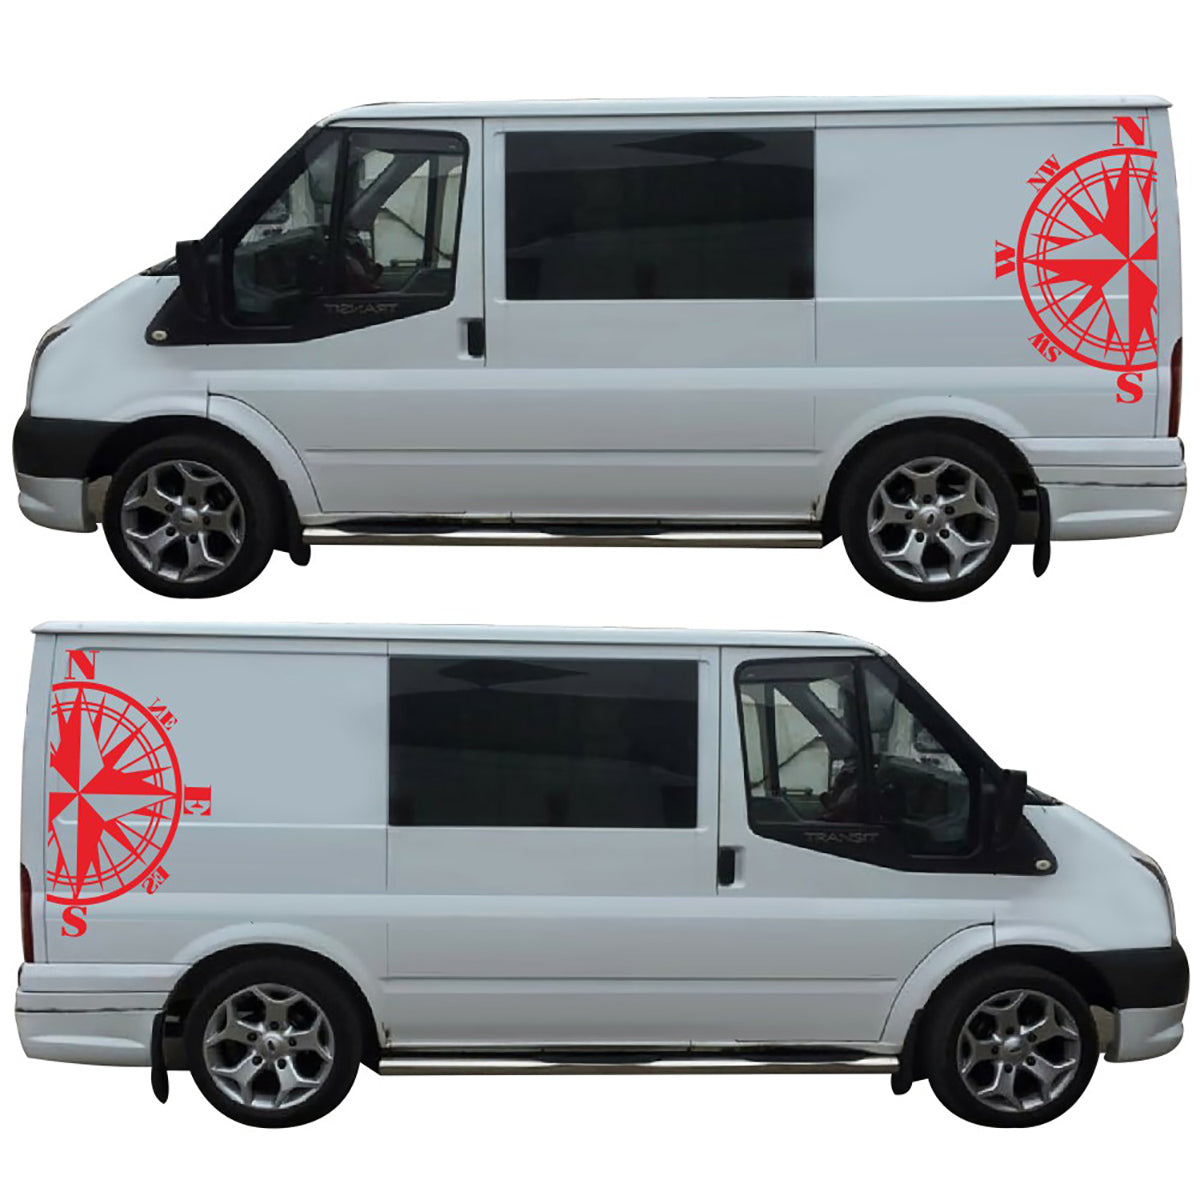 Dark Gray 2PCS Side Stickers Decals Compass For VW Multivan Transporter Caravelle T4 T5 T6